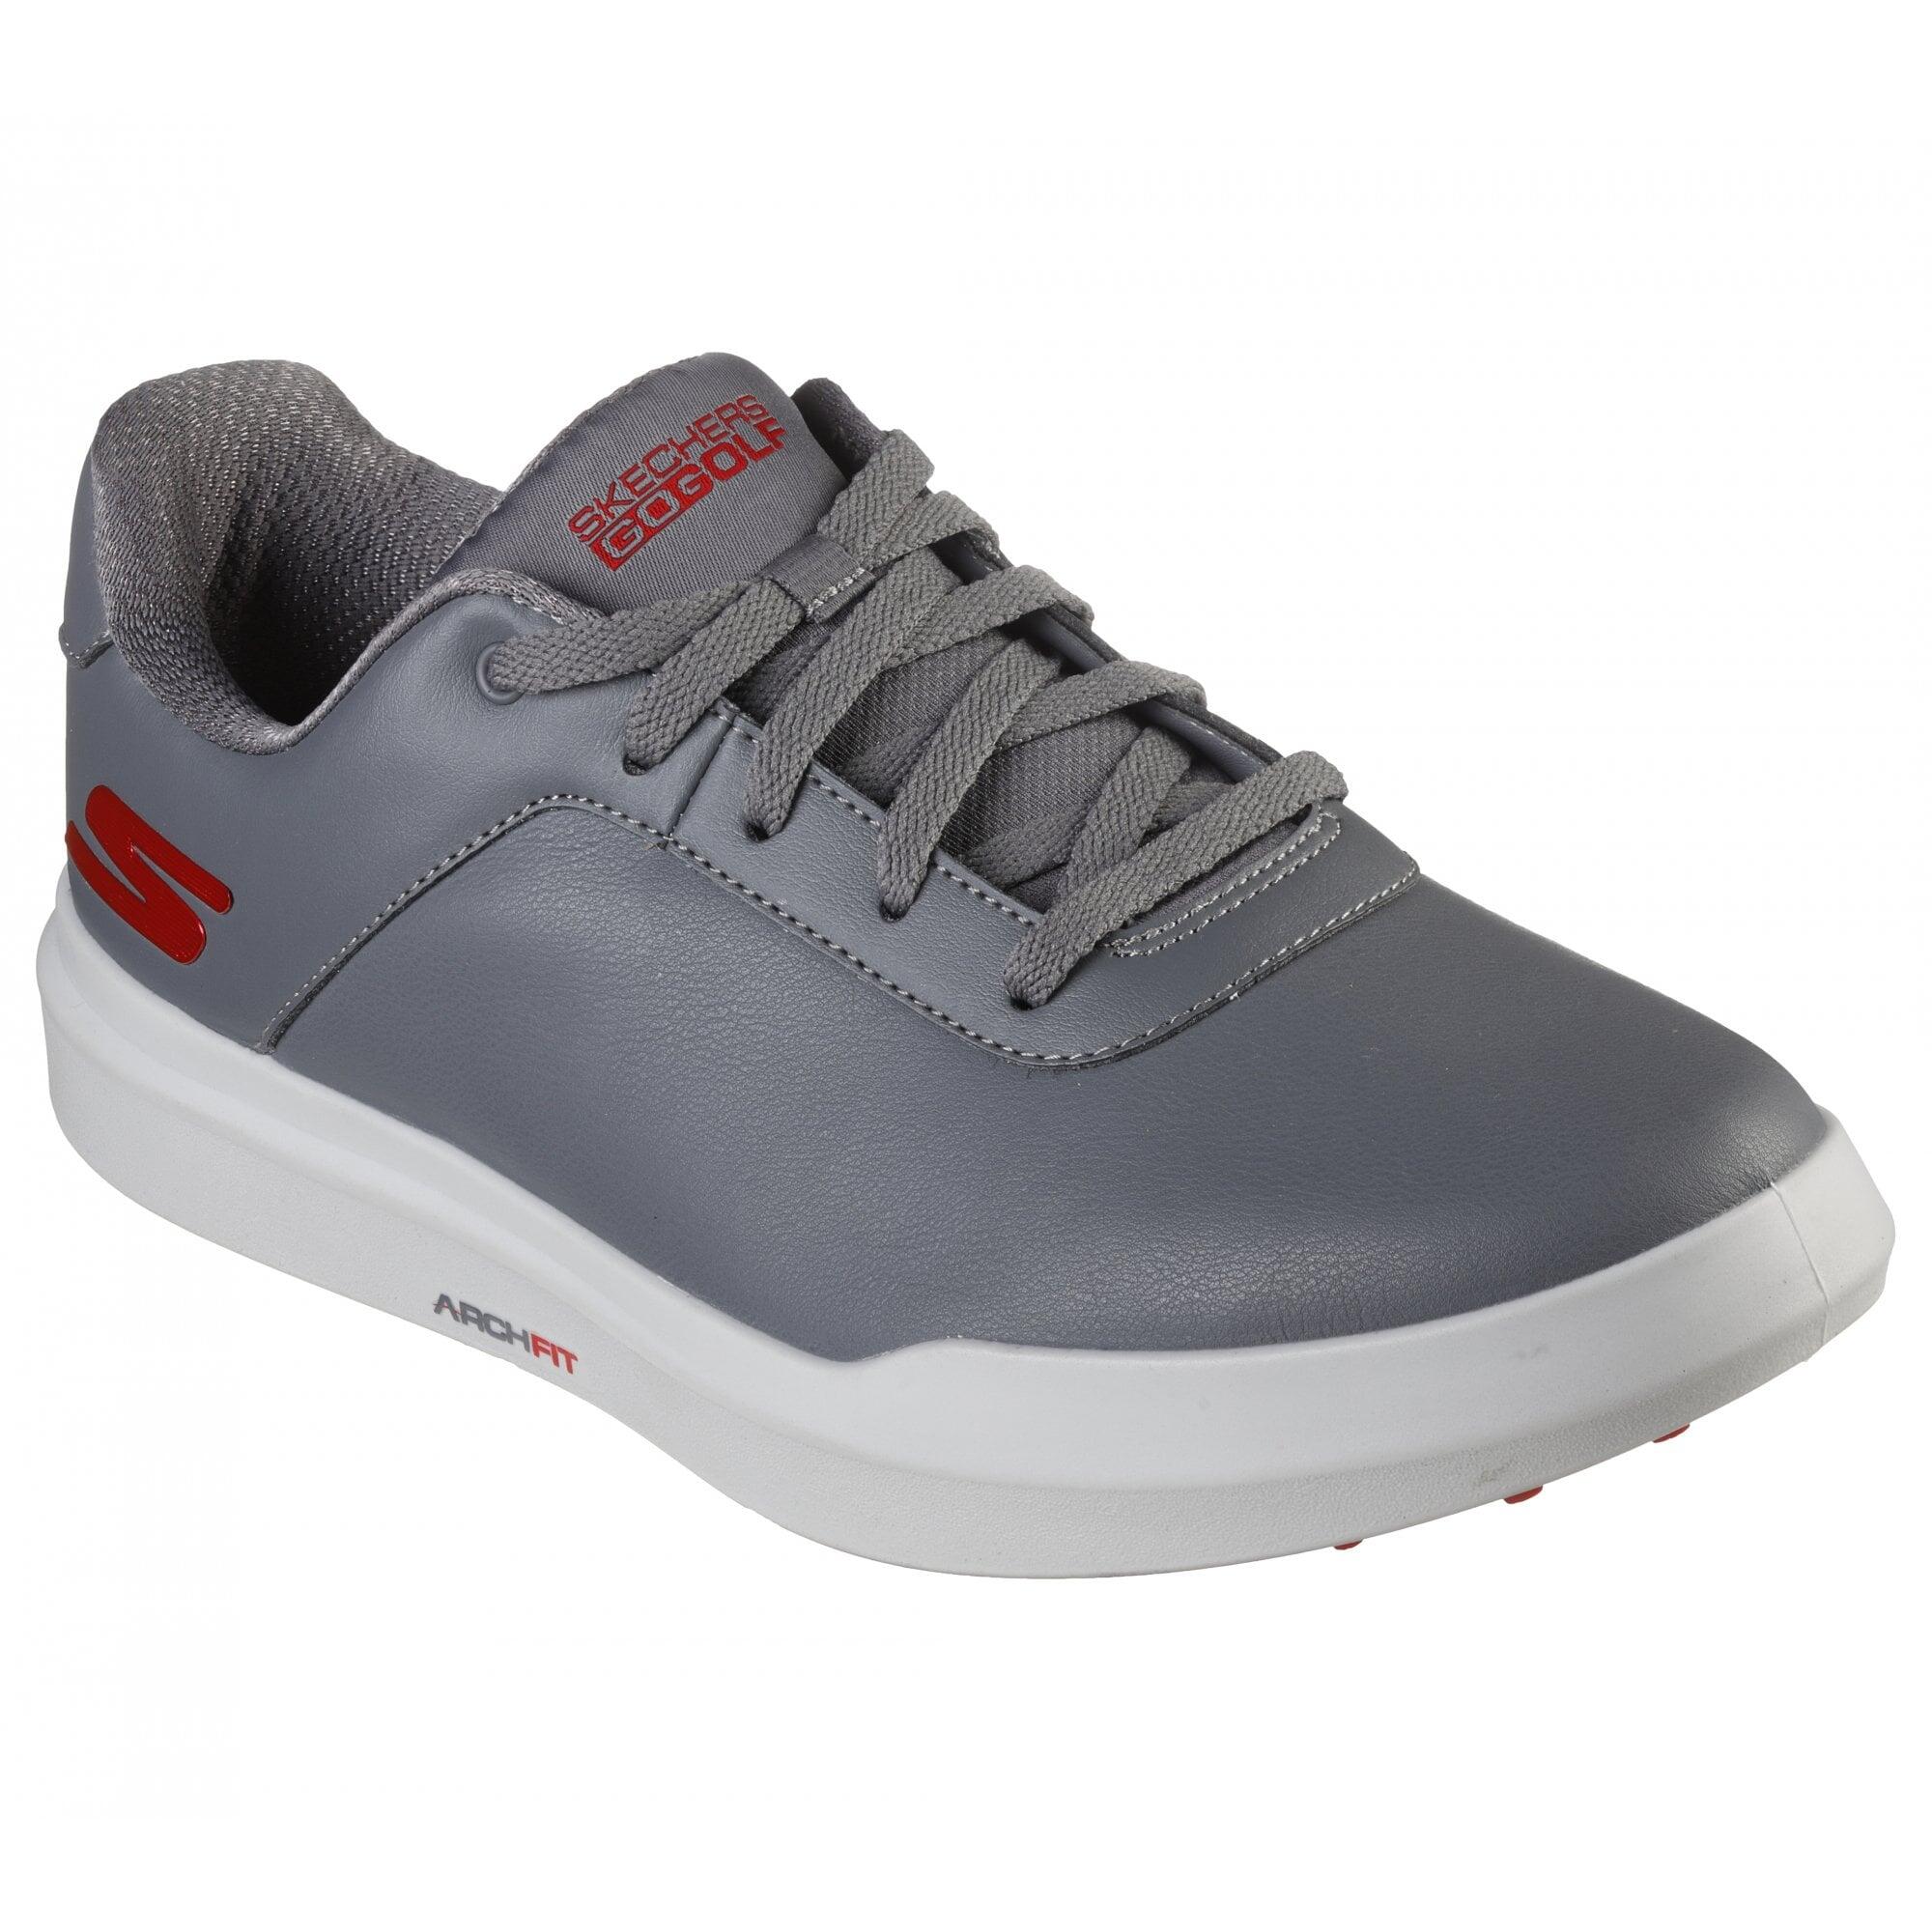 Skechers GO GOLF DRIVE 5 Golf Shoes - Grey/Red 1/7